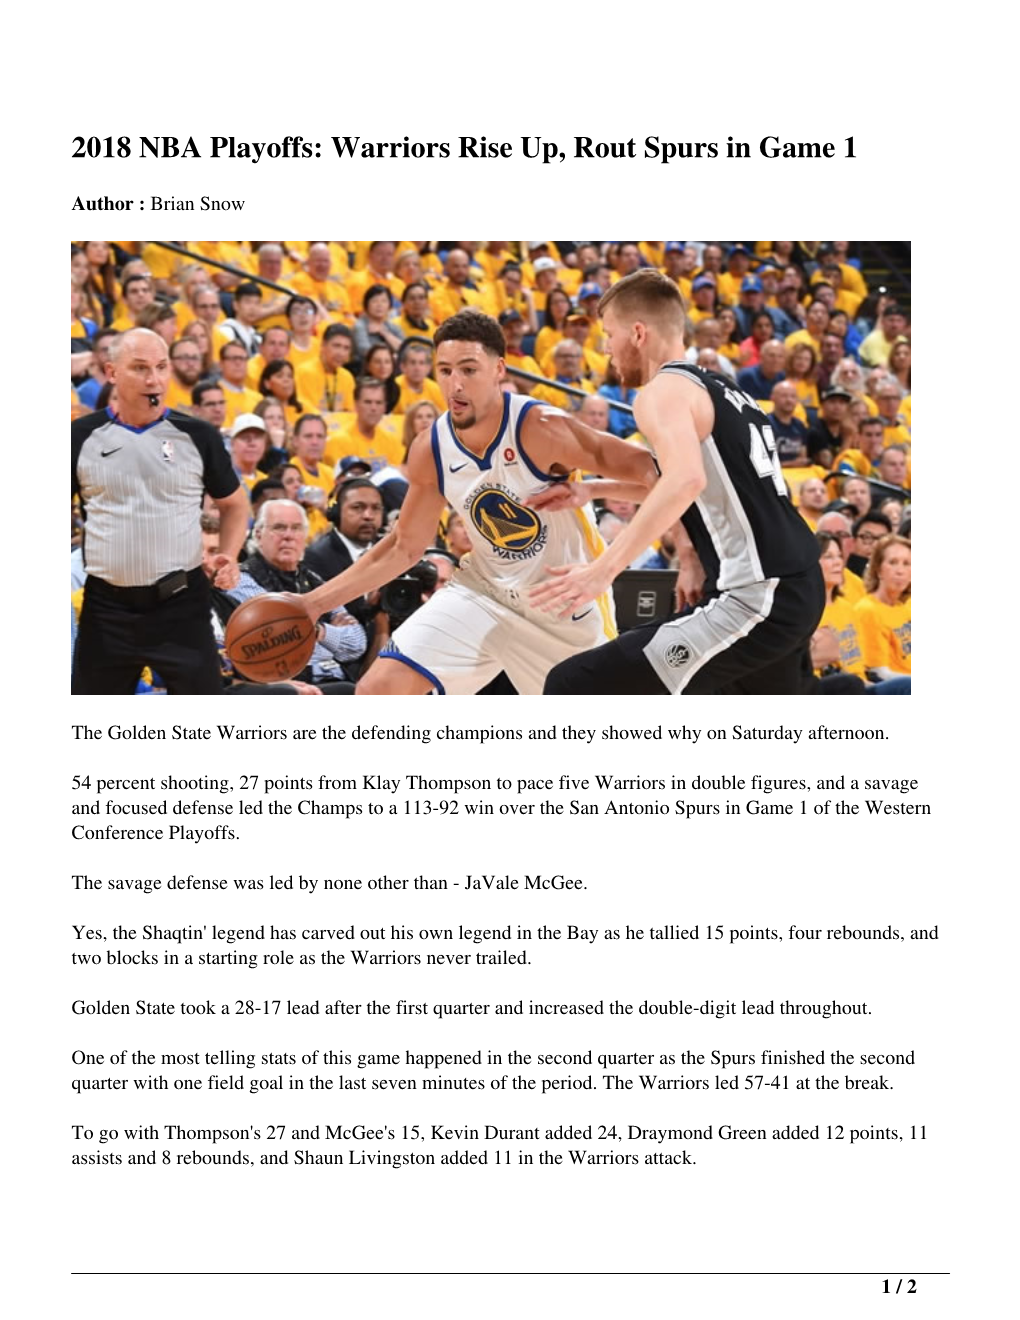 2018 NBA Playoffs: Warriors Rise Up, Rout Spurs in Game 1